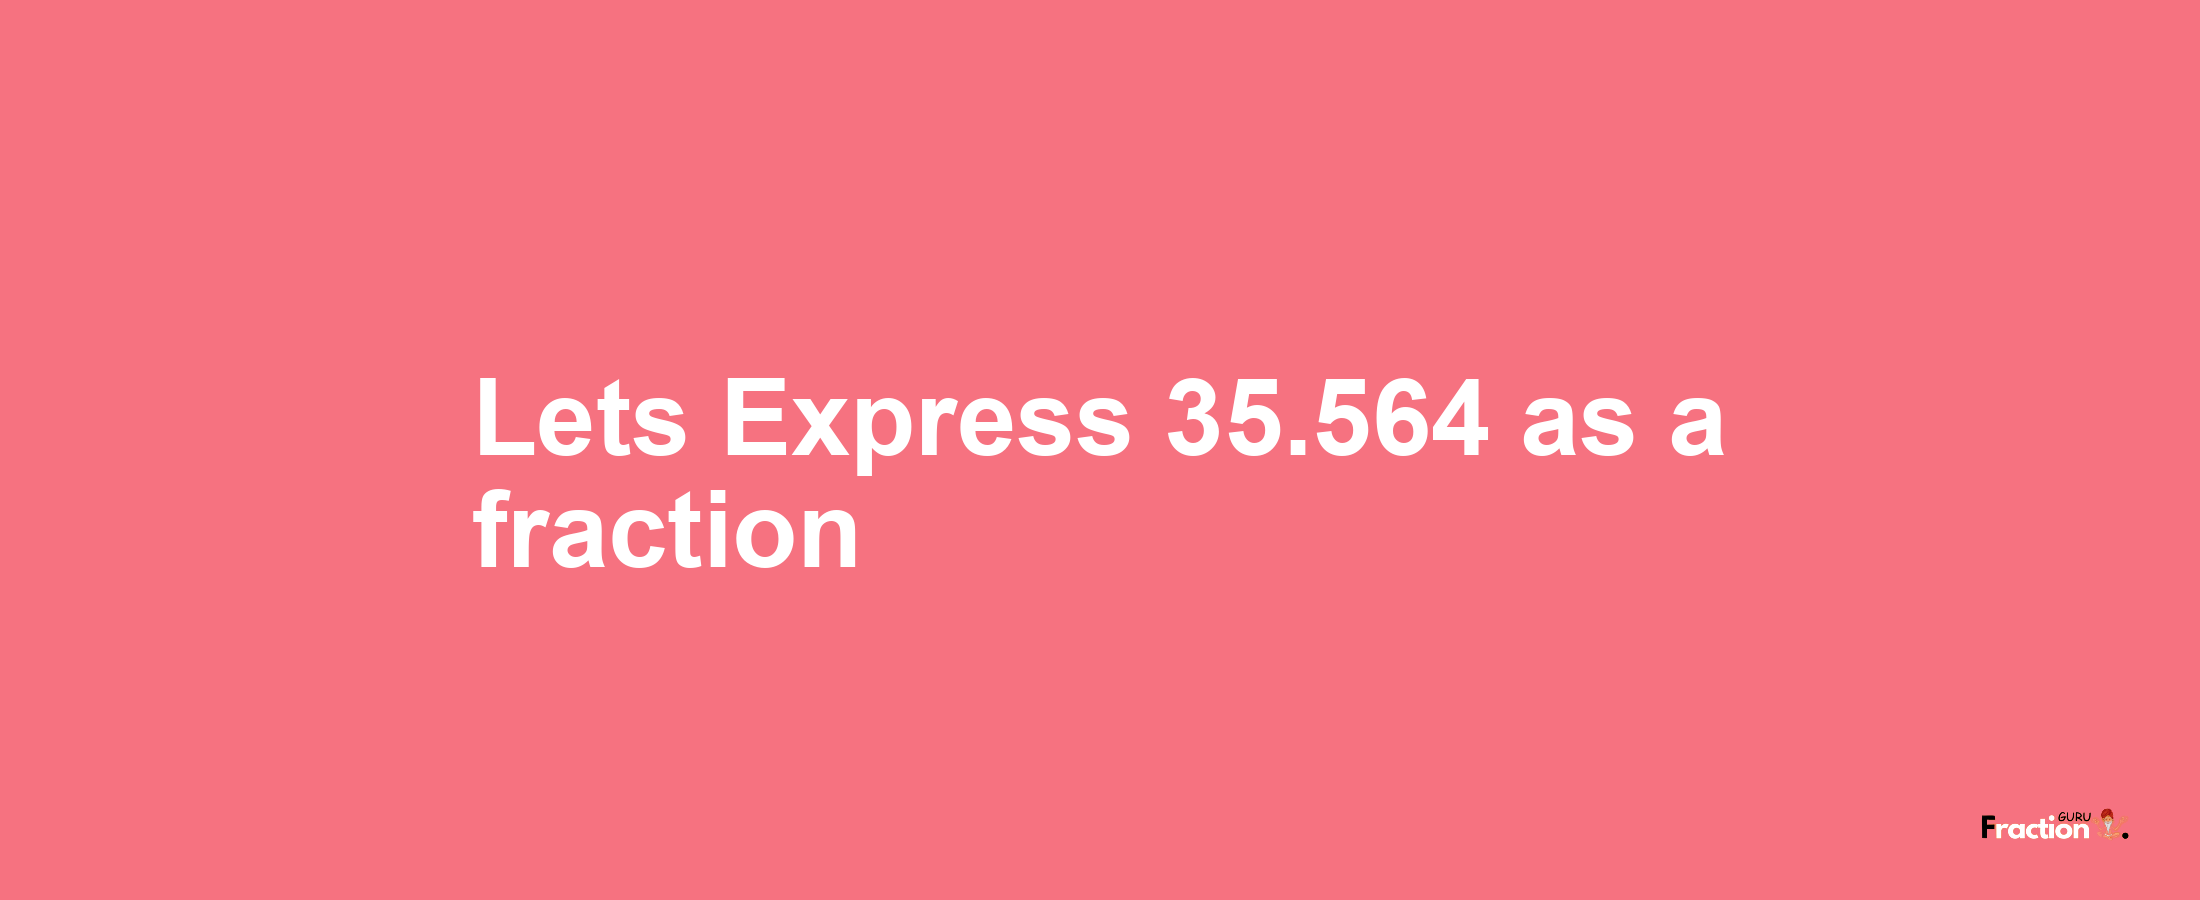 Lets Express 35.564 as afraction